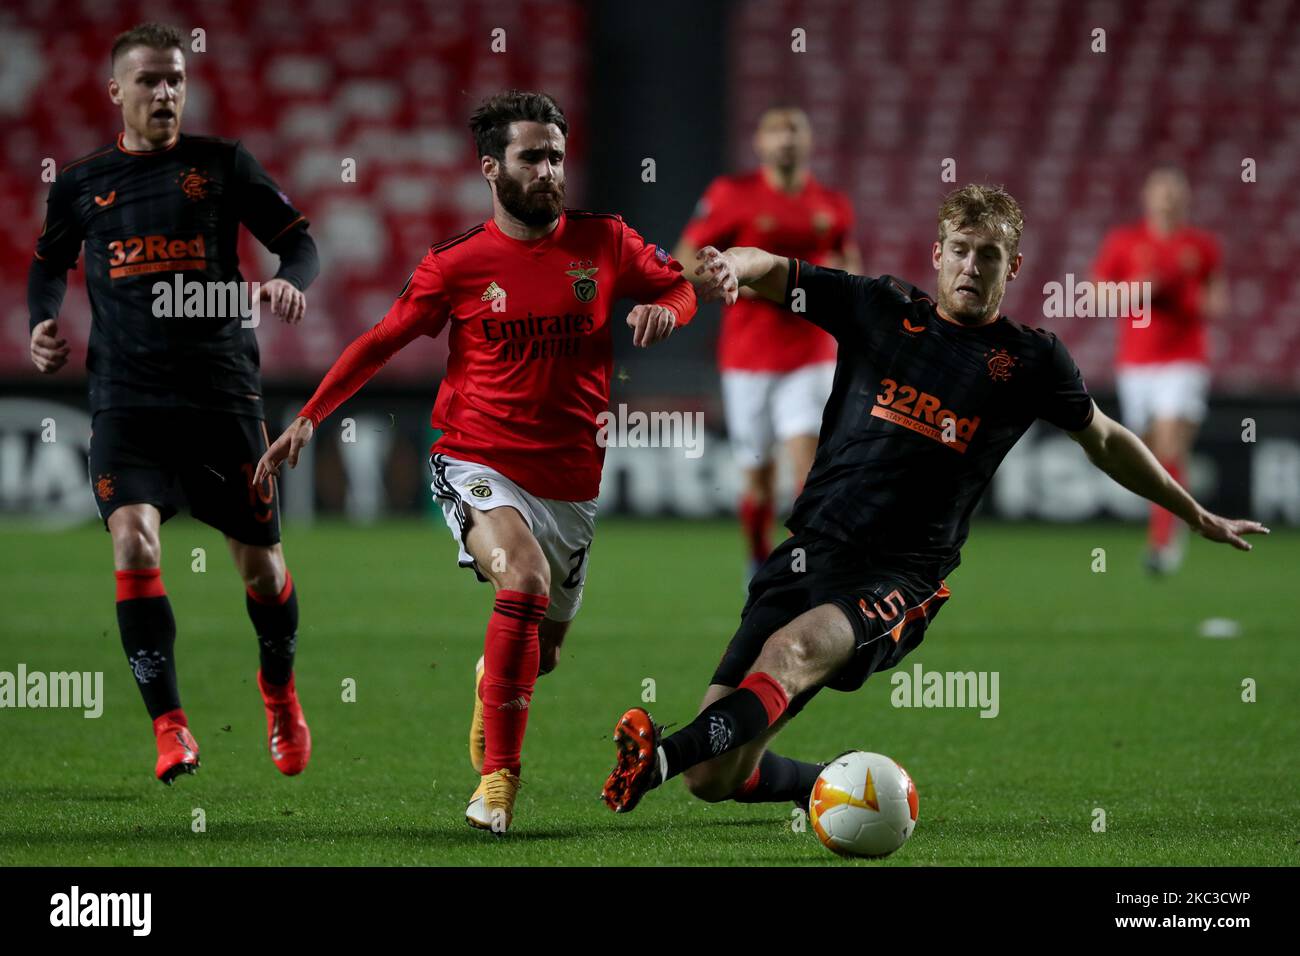 Rafa Silva of SL Benfica (C ) vies with Filip Helander of Rangers FC during the UEFA Europa League group D football match between SL Benfica and Rangers FC at the Luz stadium in Lisbon, Portugal on November 5, 2020. (Photo by Pedro FiÃºza/NurPhoto) Stock Photo